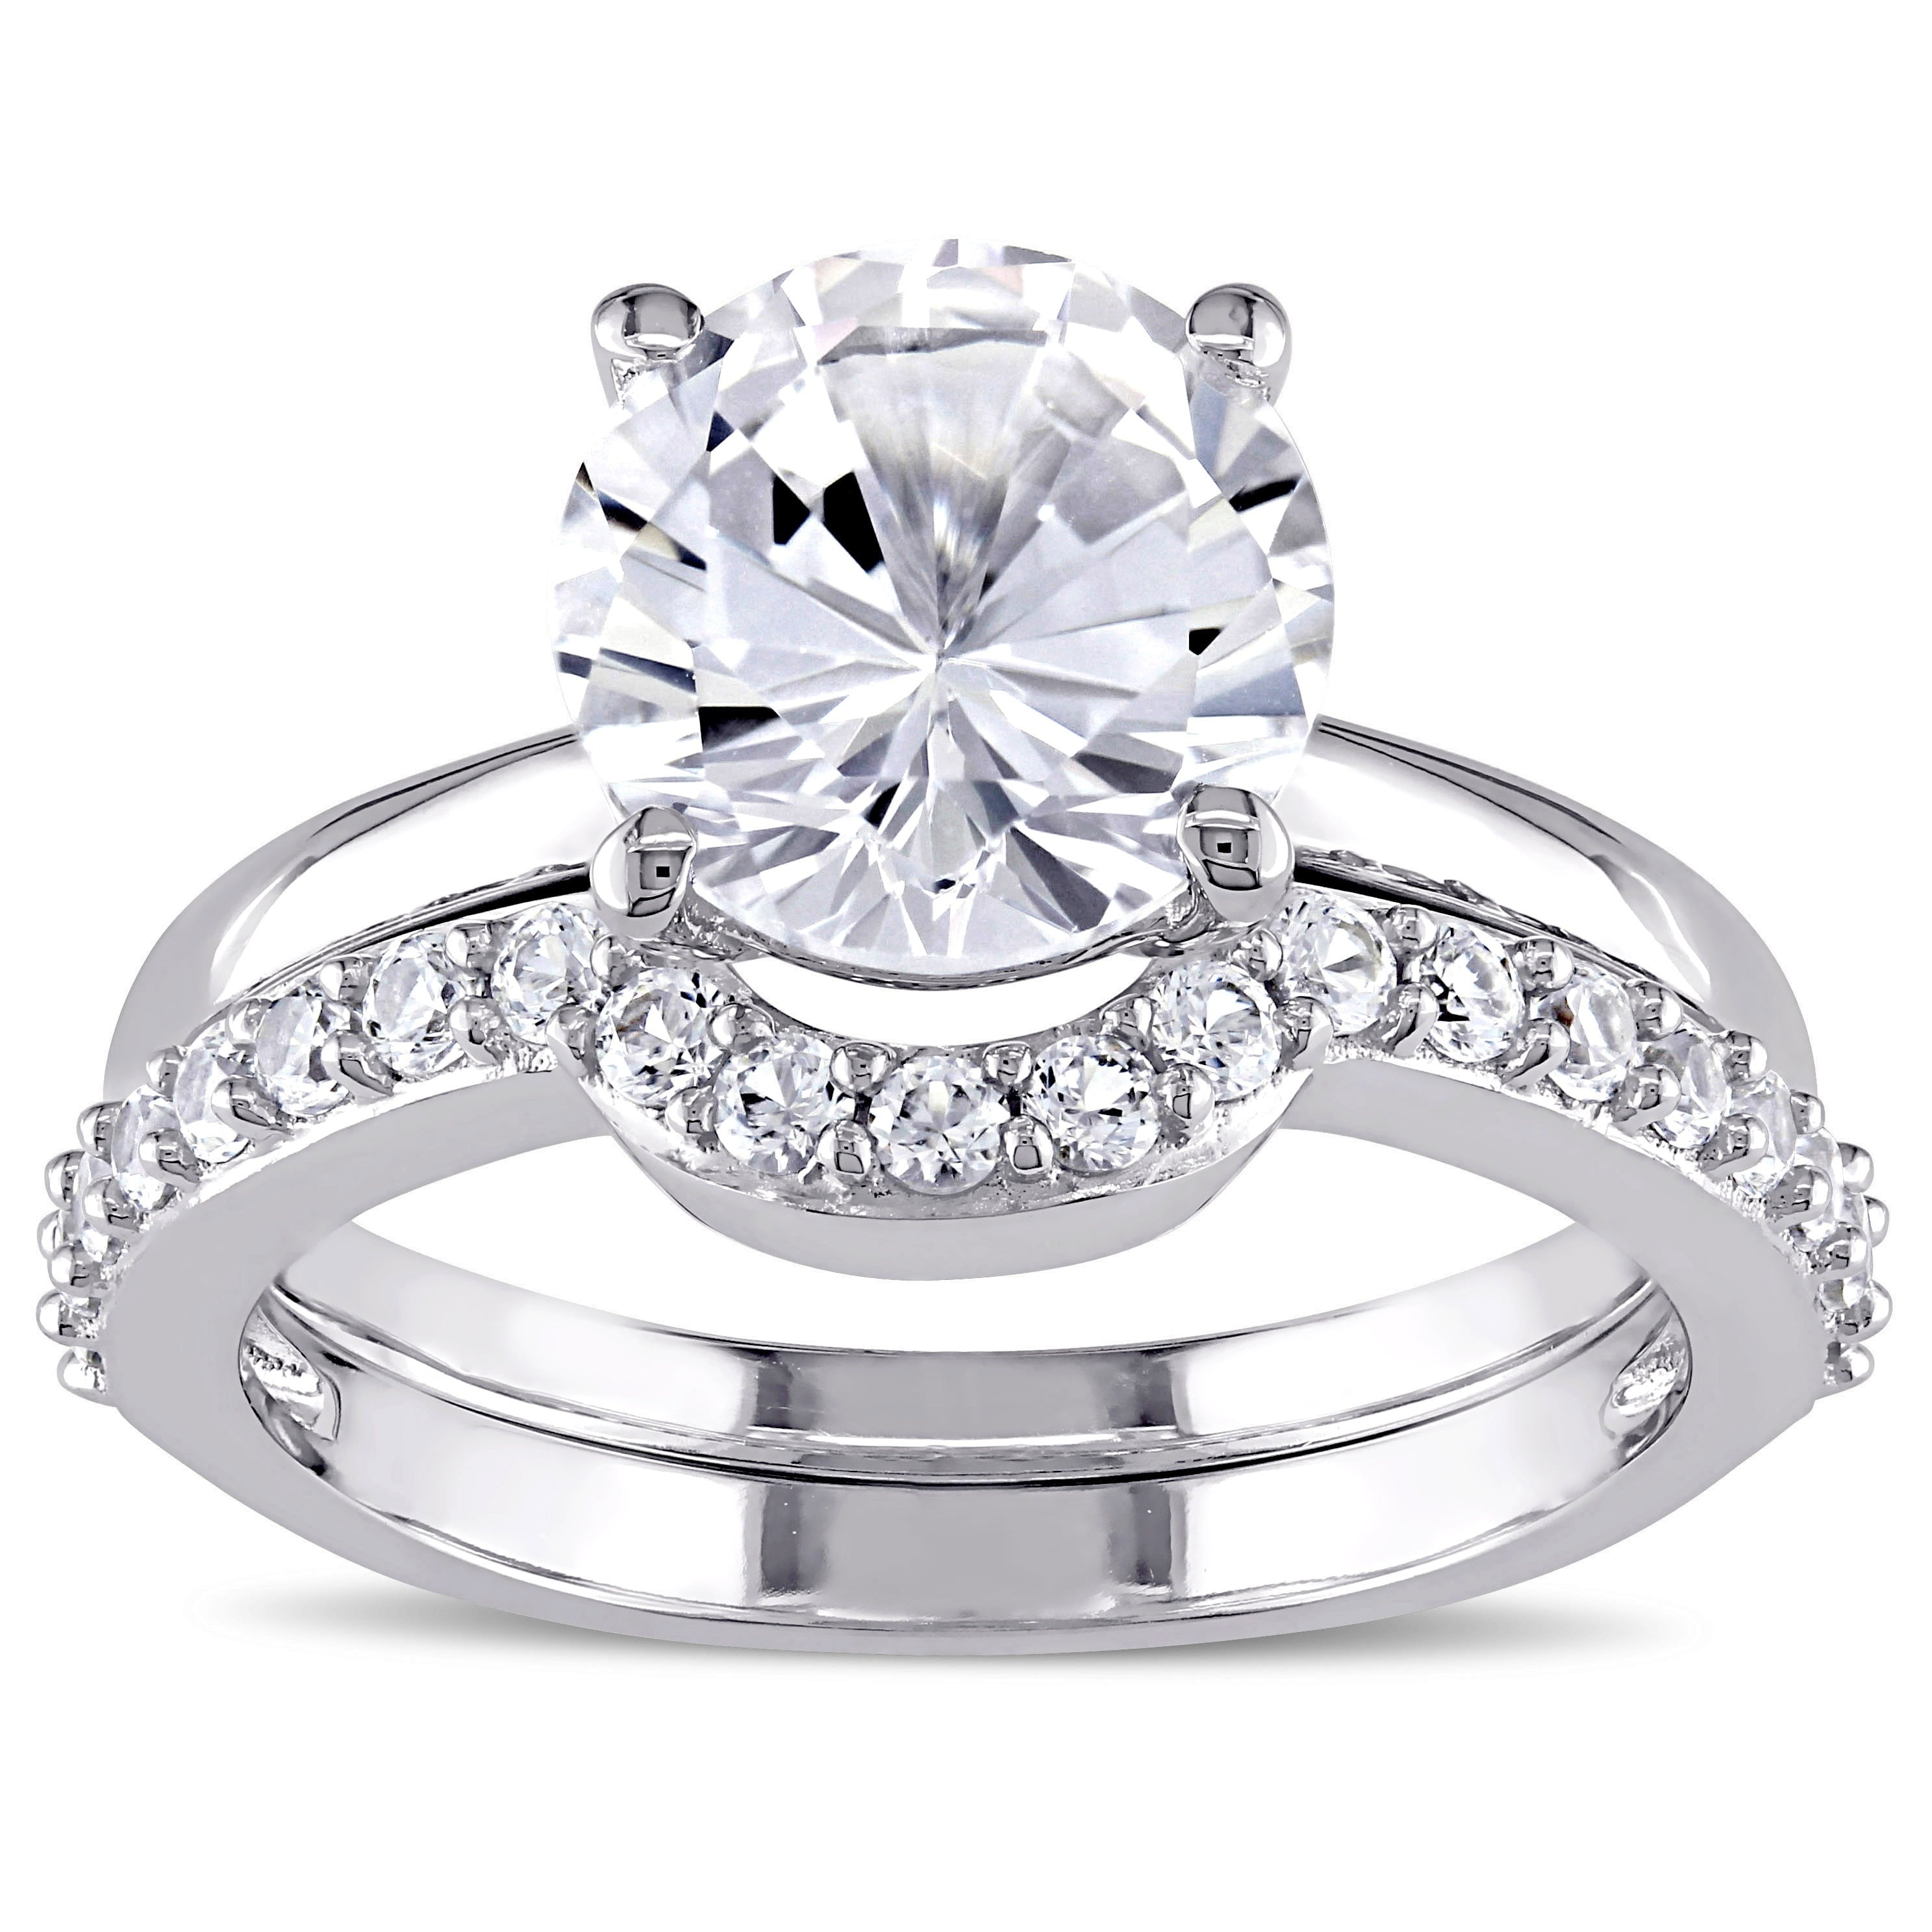 Details about   1.5 CT Classic Diamond Solitaire Engagement Ring Sterling Silver Platinum Finish